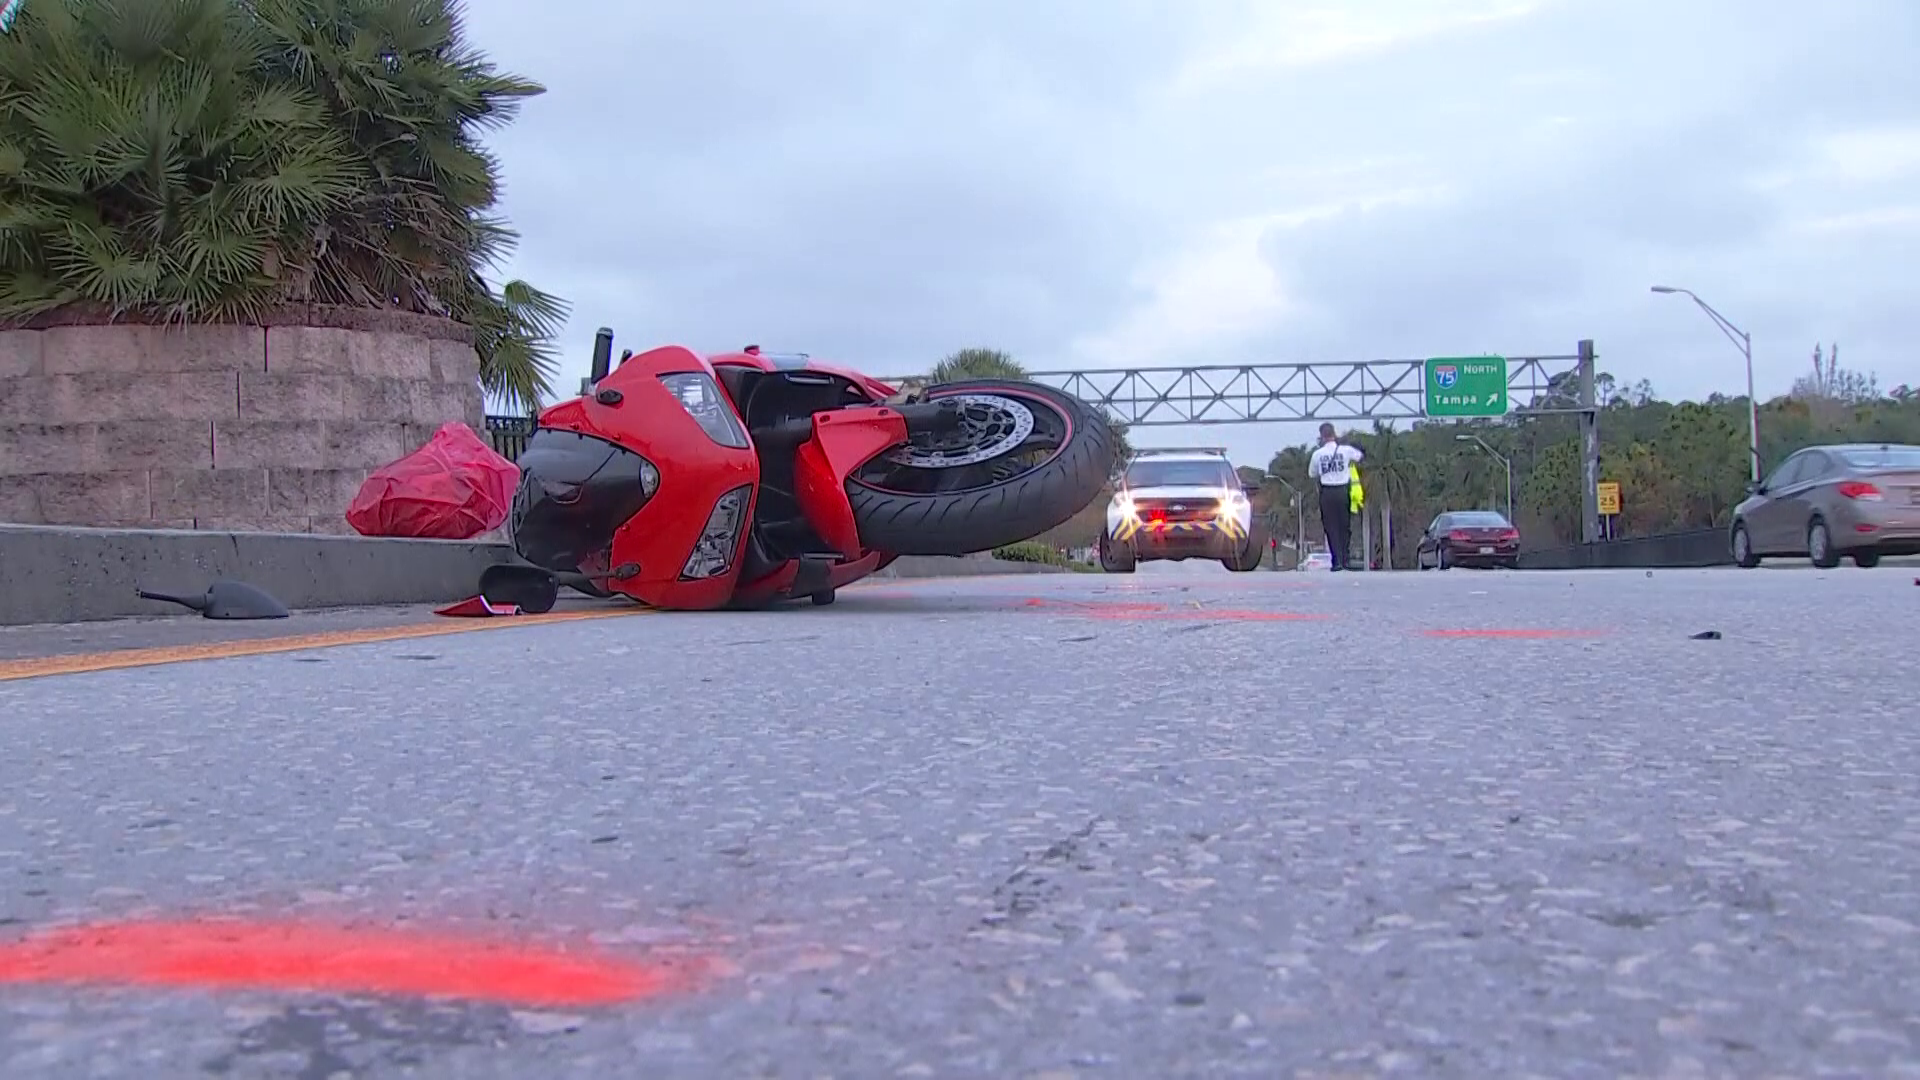 New data suggests Florida has some of the highest motorcycle-related deaths nationwide.